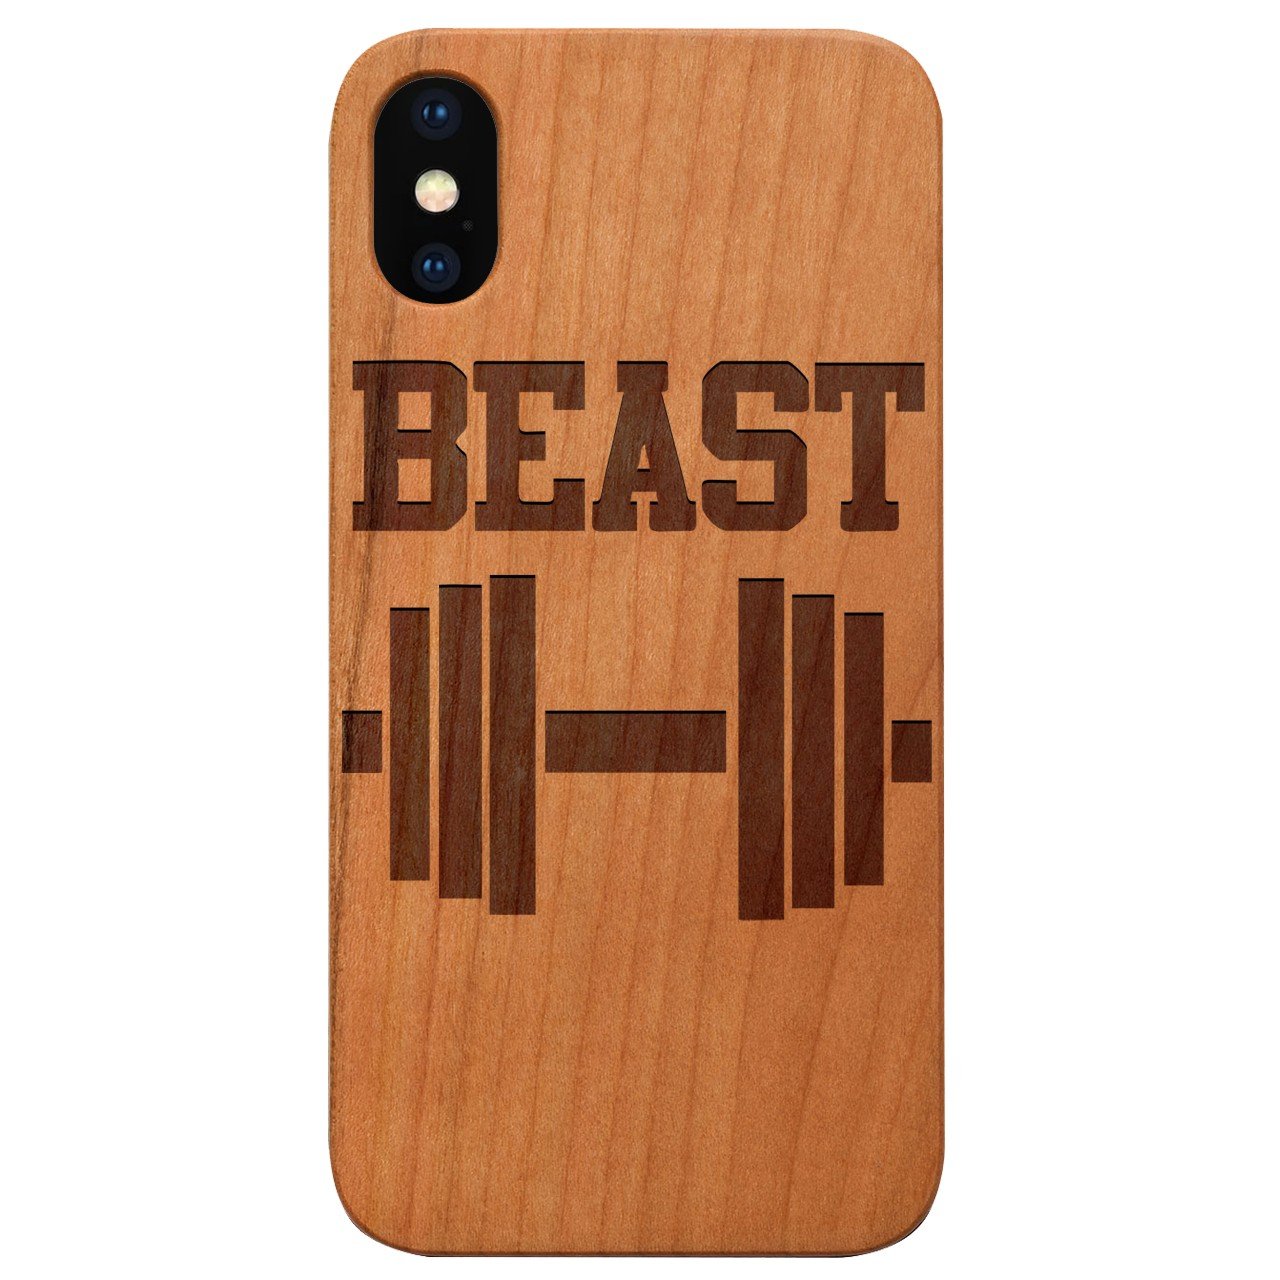 Beast - Engraved - Wooden Phone Case